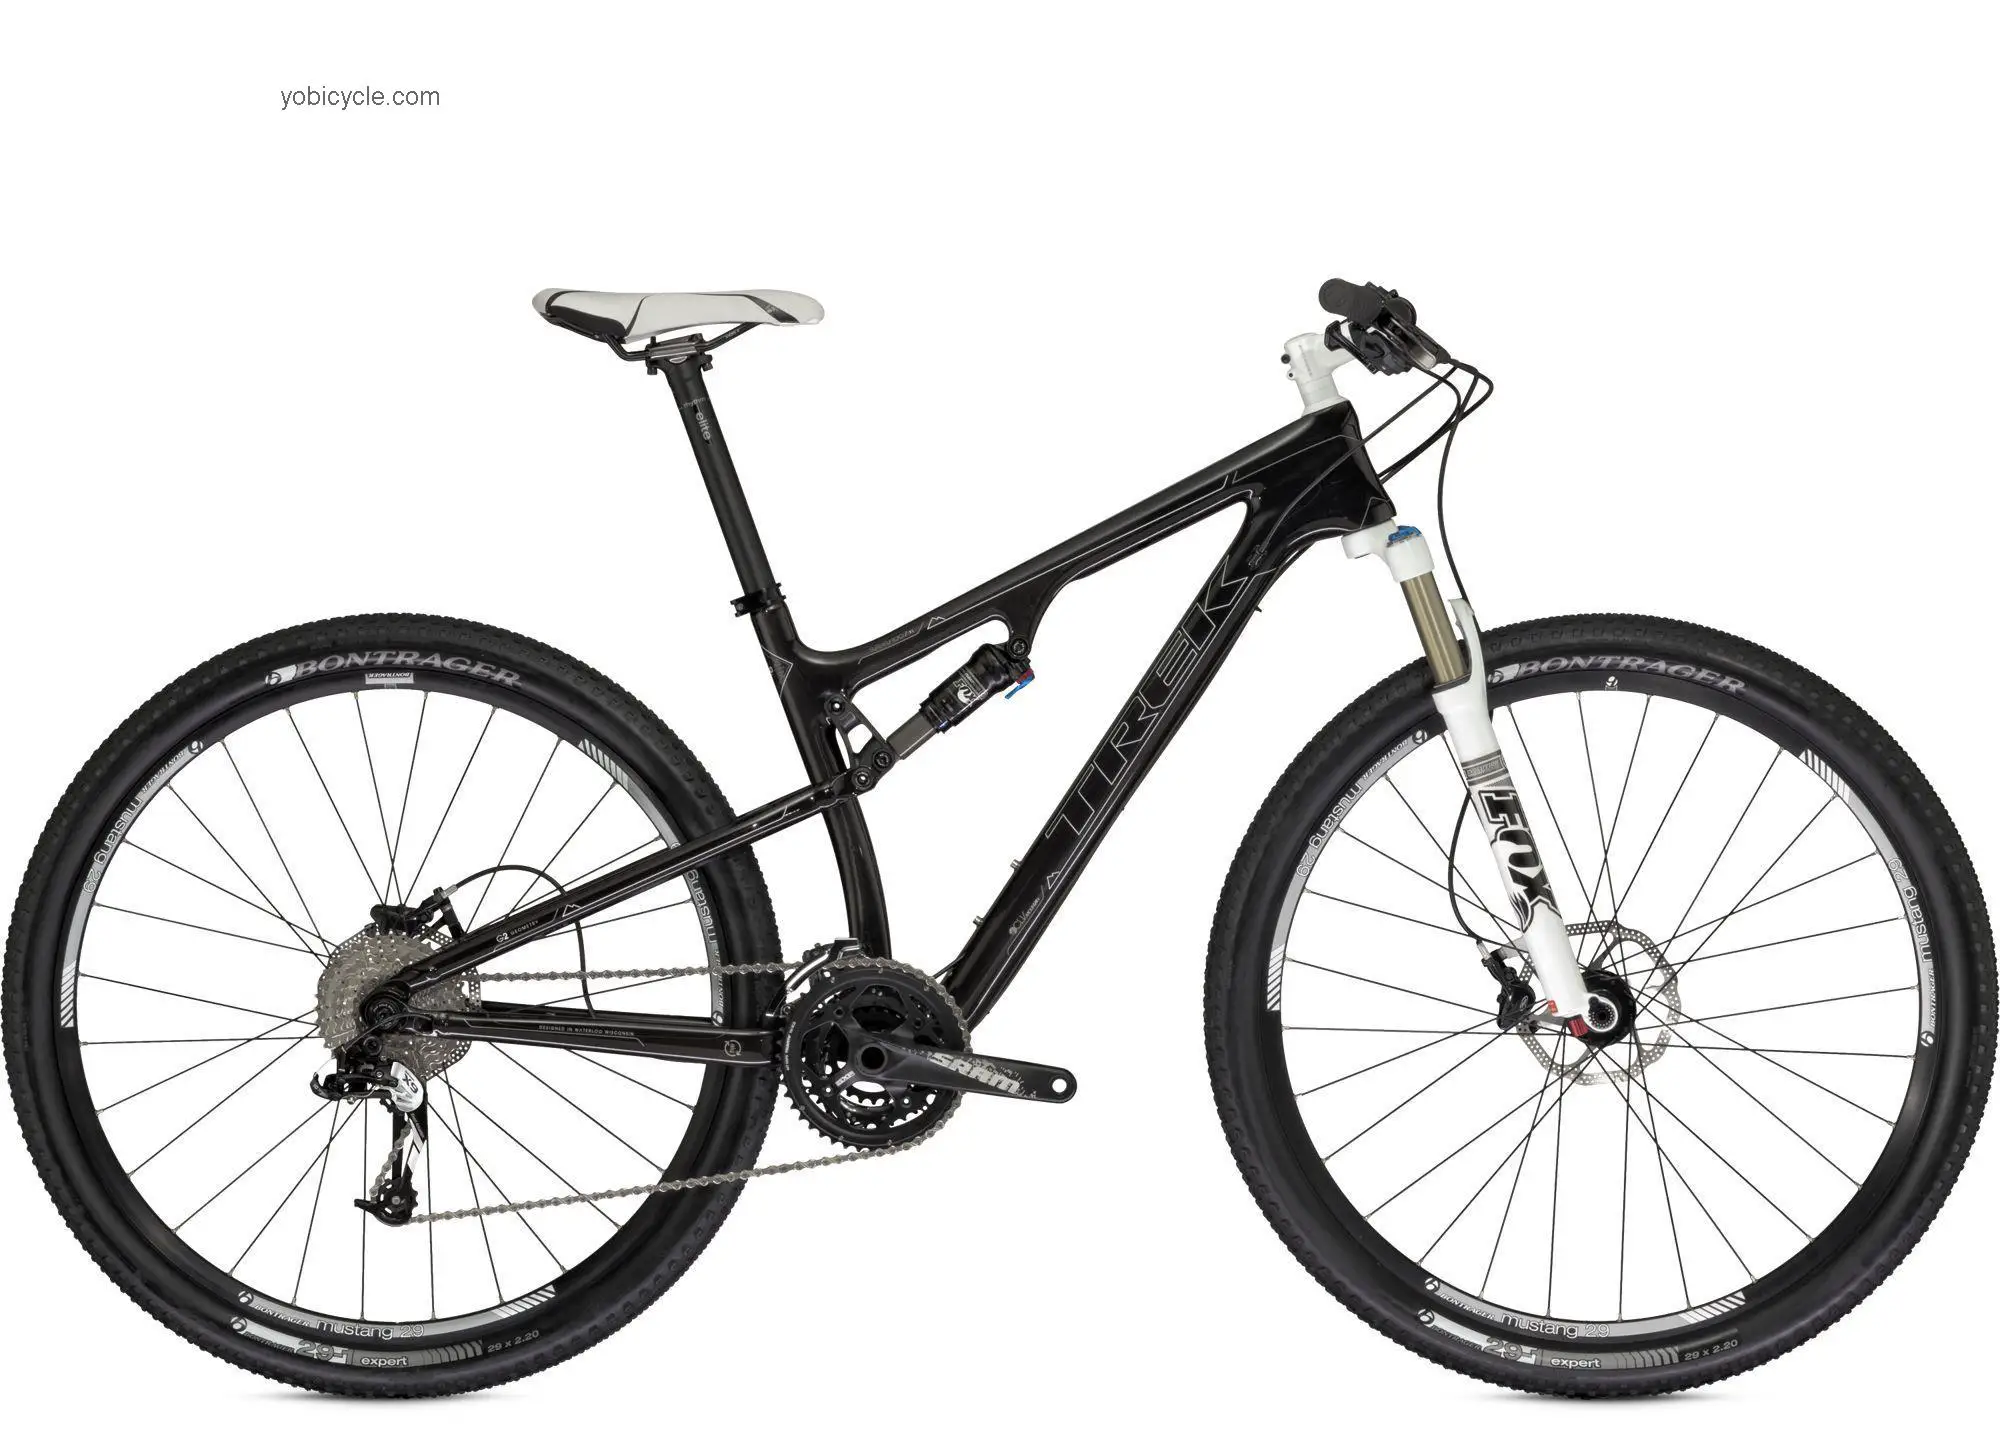 Trek Superfly 100 SL 2013 comparison online with competitors